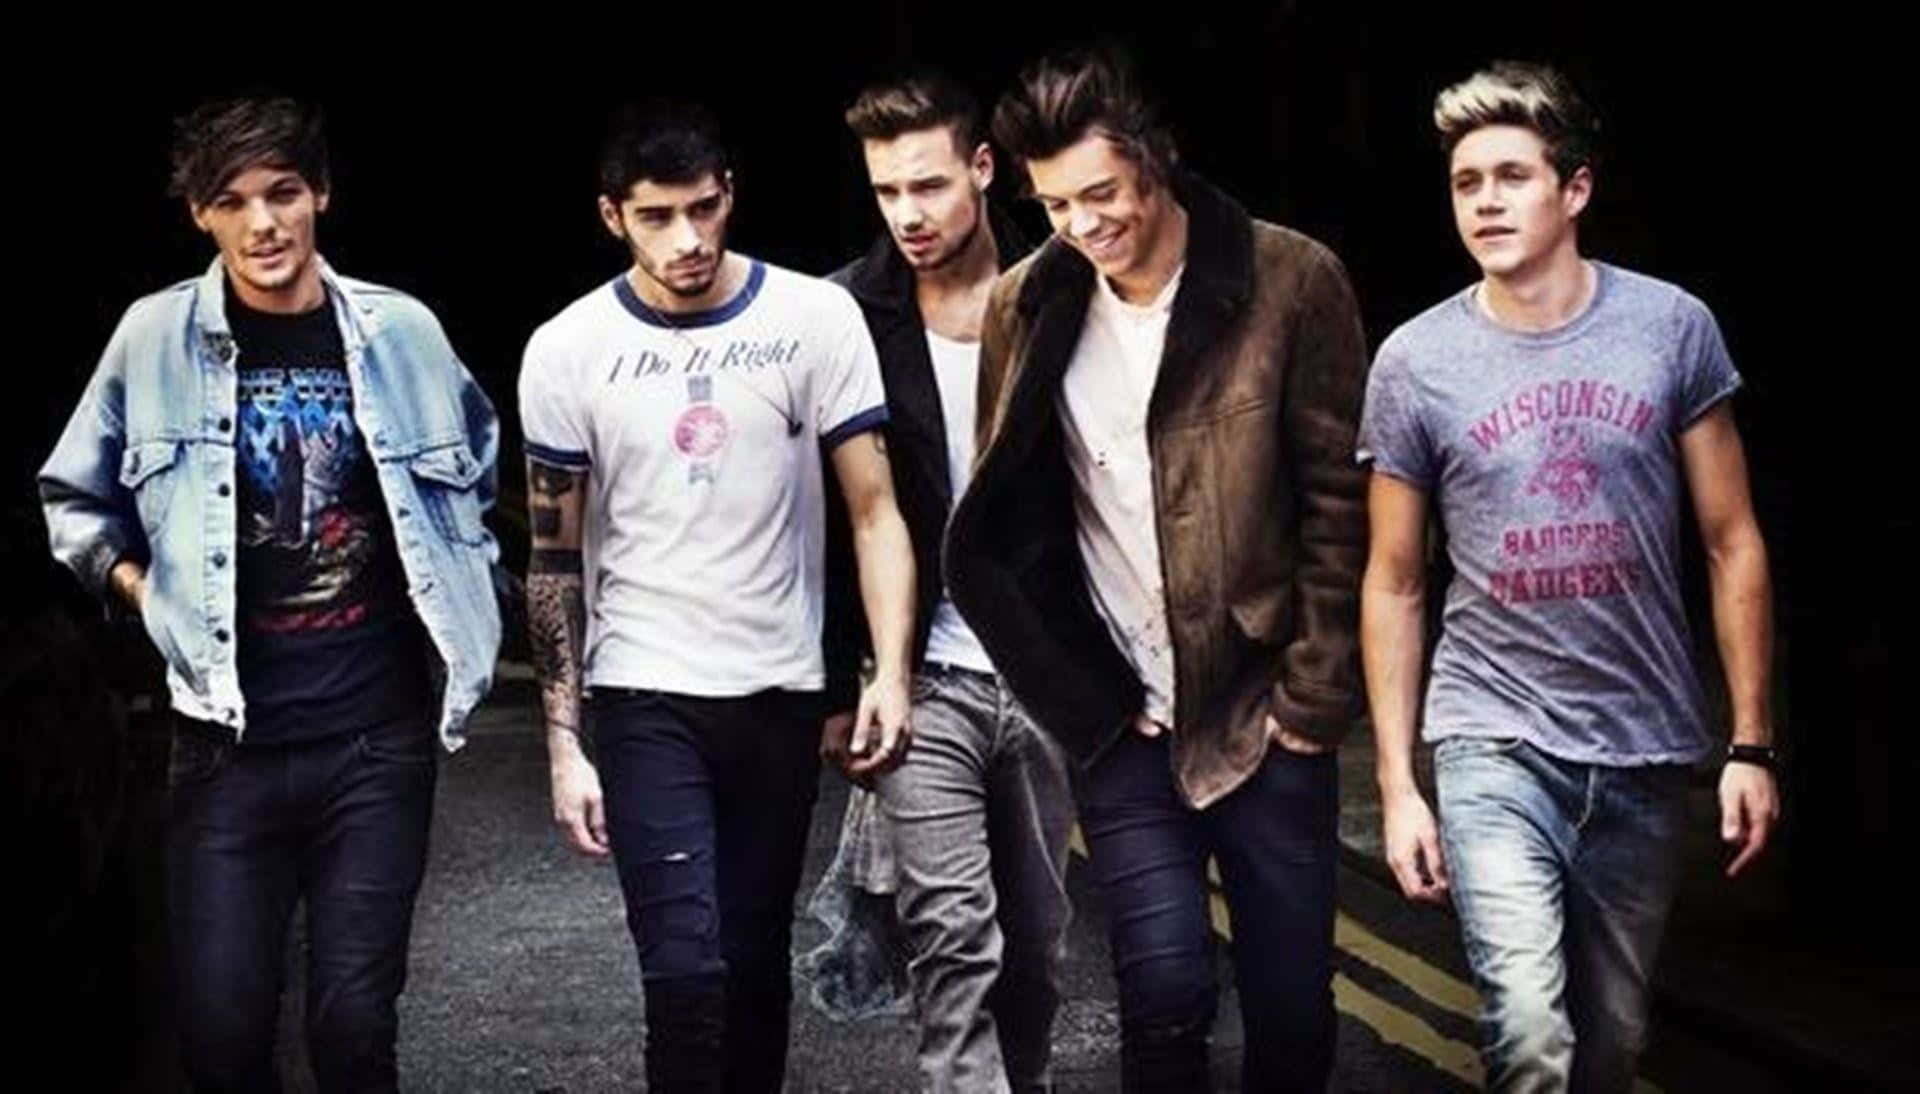 Show your love for One Direction with this colorful and fun laptop Wallpaper